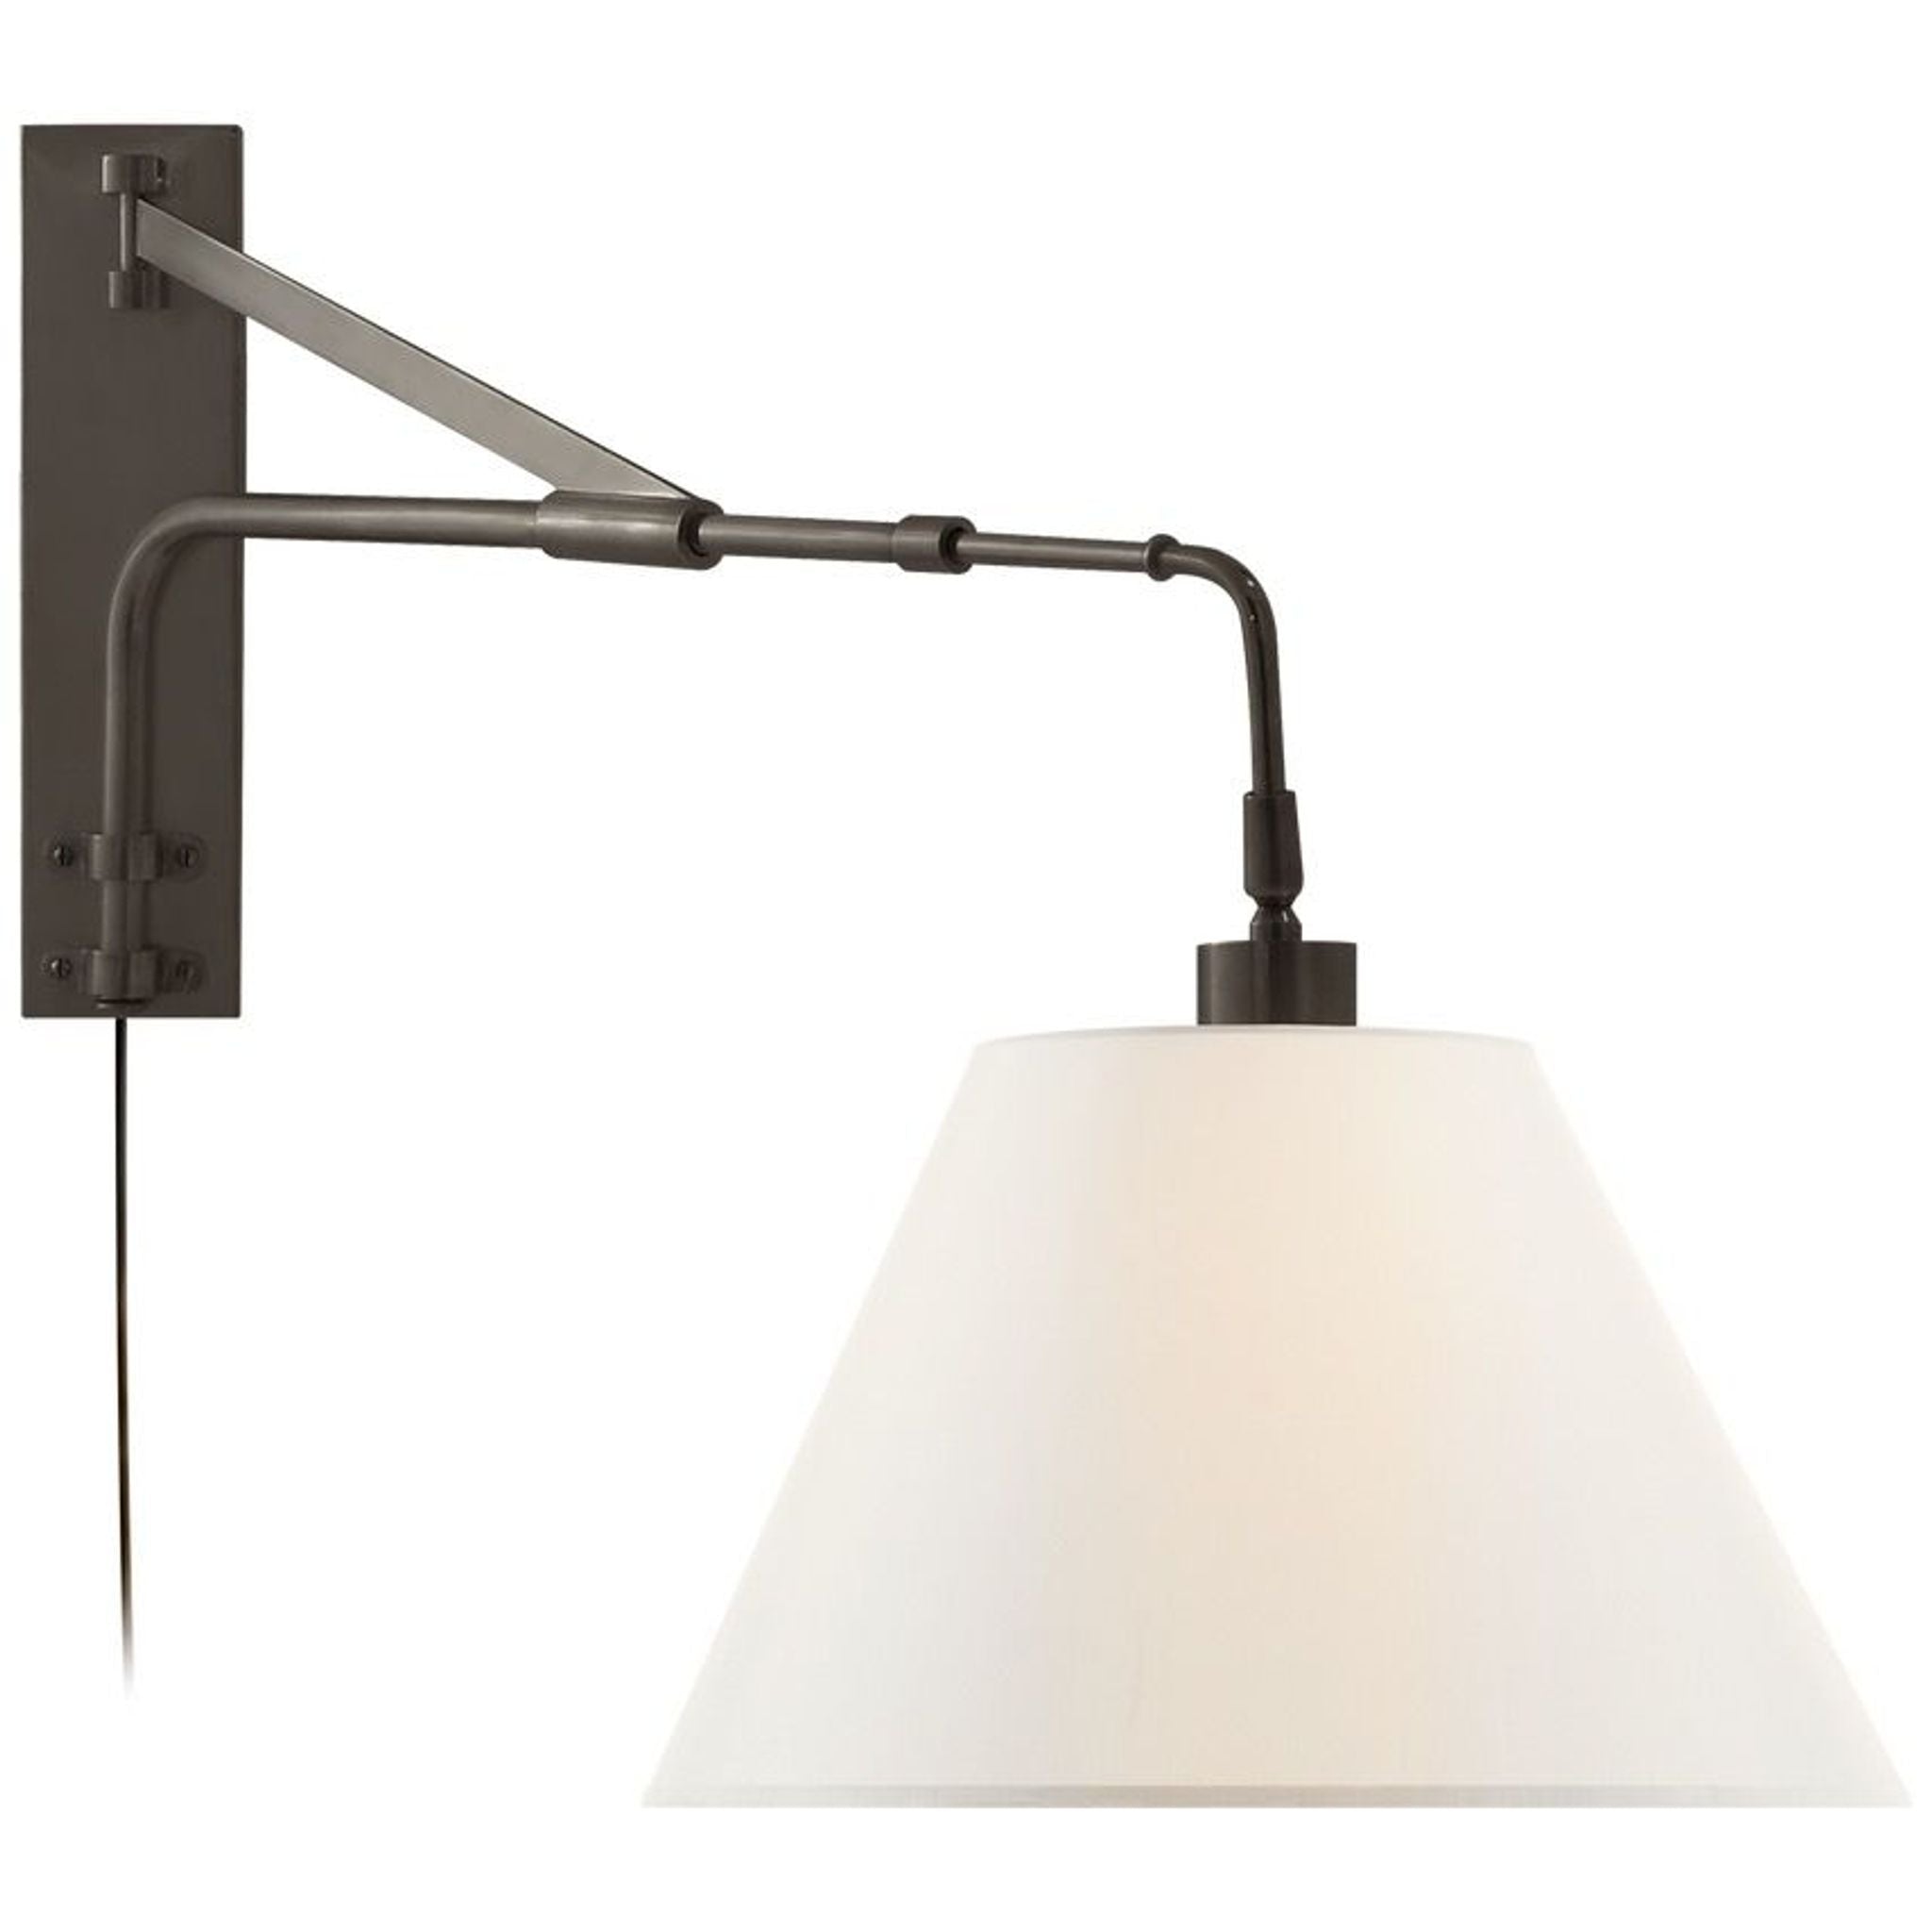 Alt text 1: Ralph Lauren Collection wall-mounted light with a polished nickel 90-degree bent pole and pivoting white lampshade by Visual Comfort.